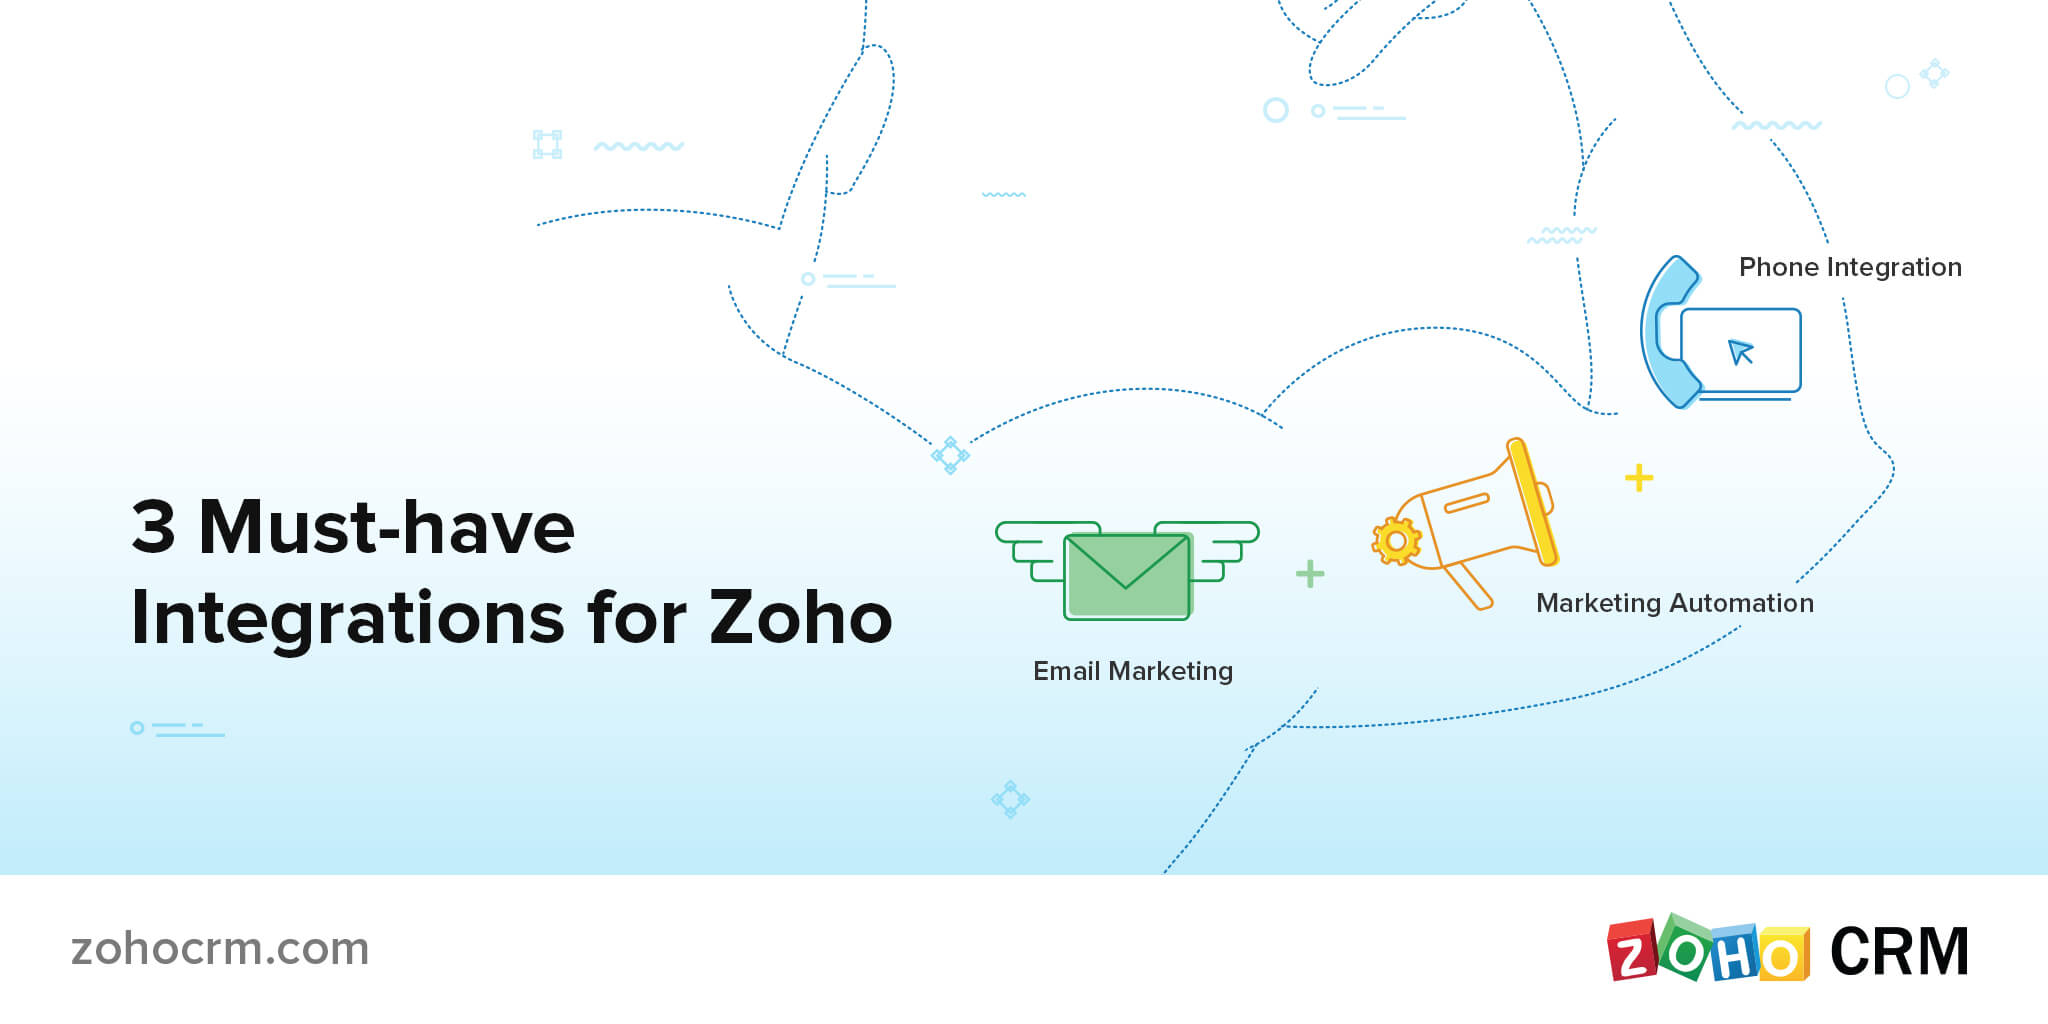 3 must-have integrations for Zoho.